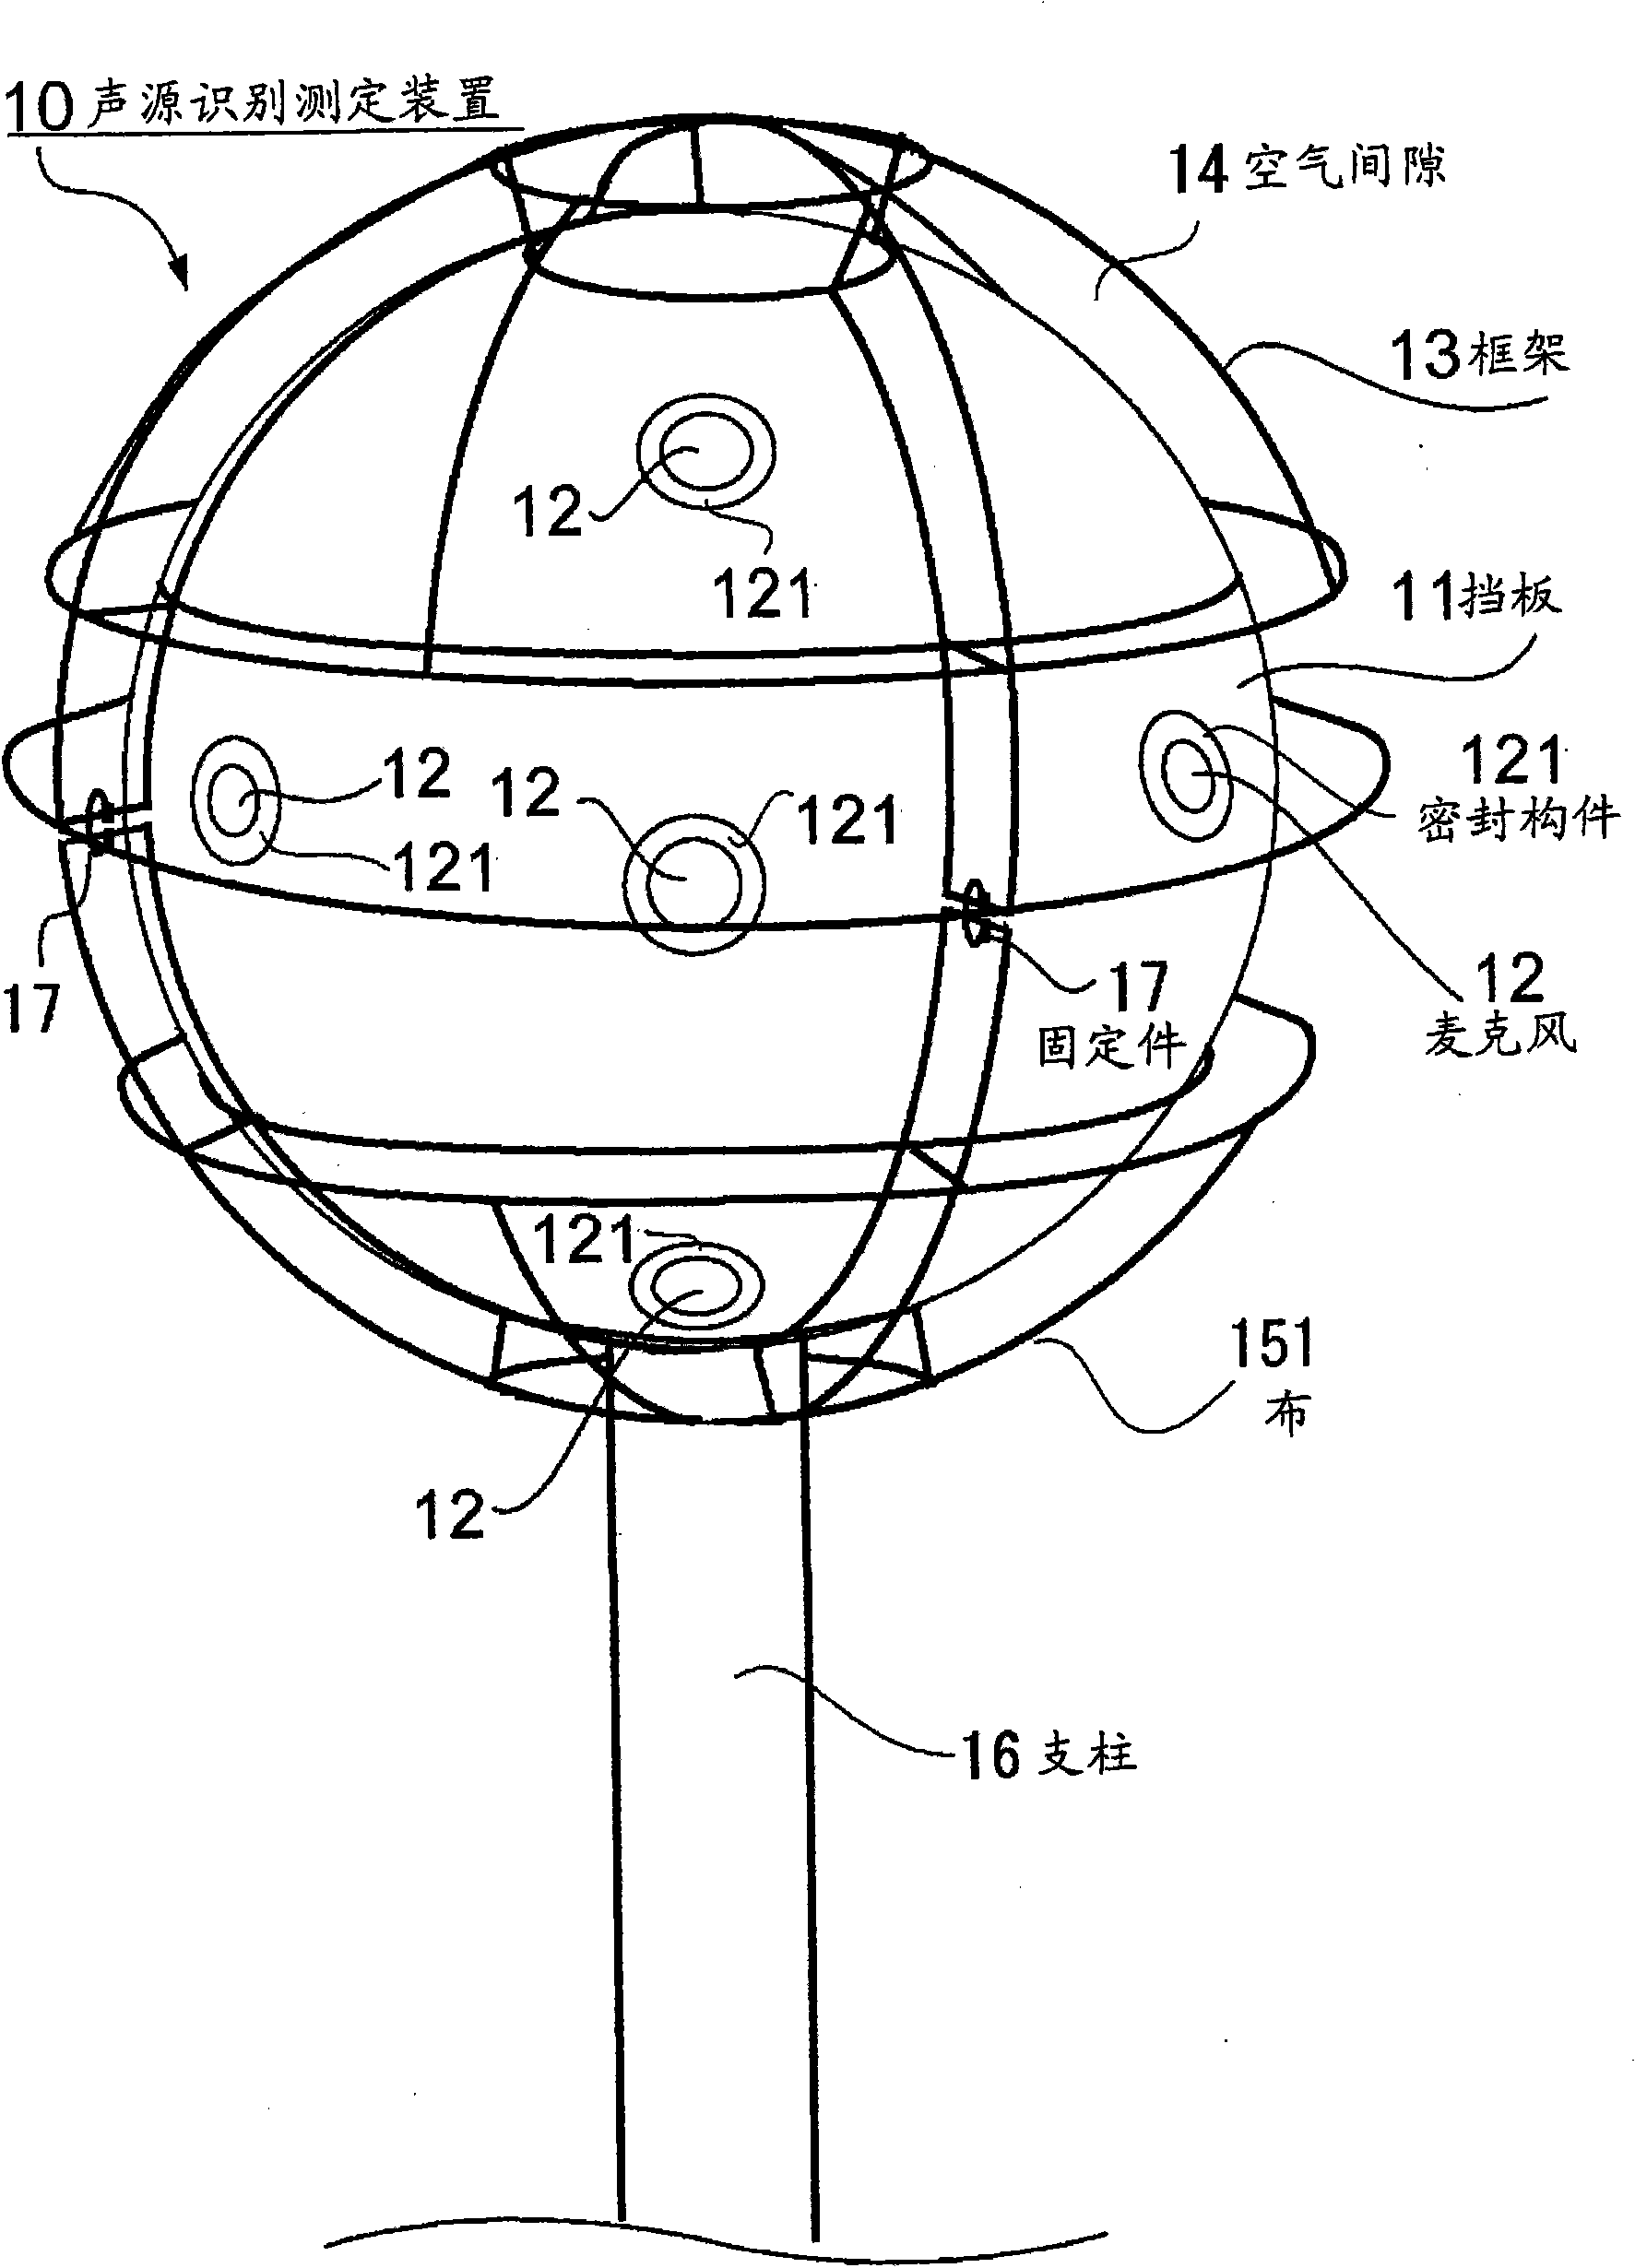 Sound source identifying and measuring apparatus, system and method